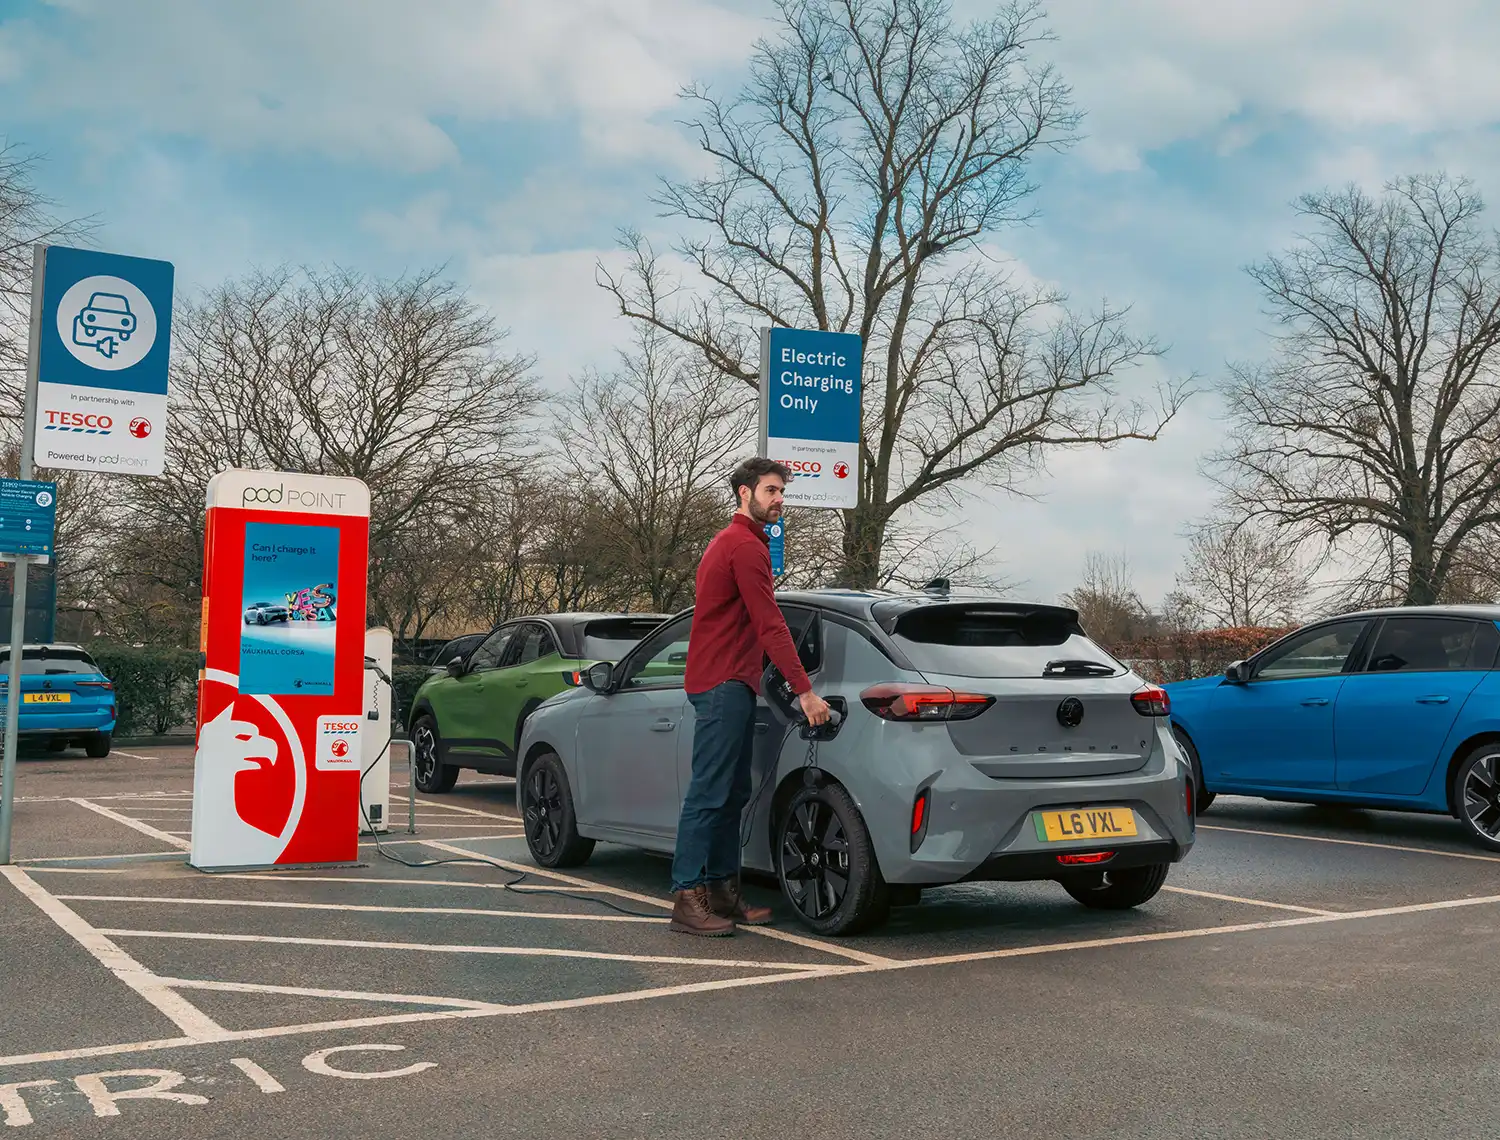 Tesco and Vauxhall Partnership supports Vauxhall’s Electric Streets campaign promoting greater access to EV charging